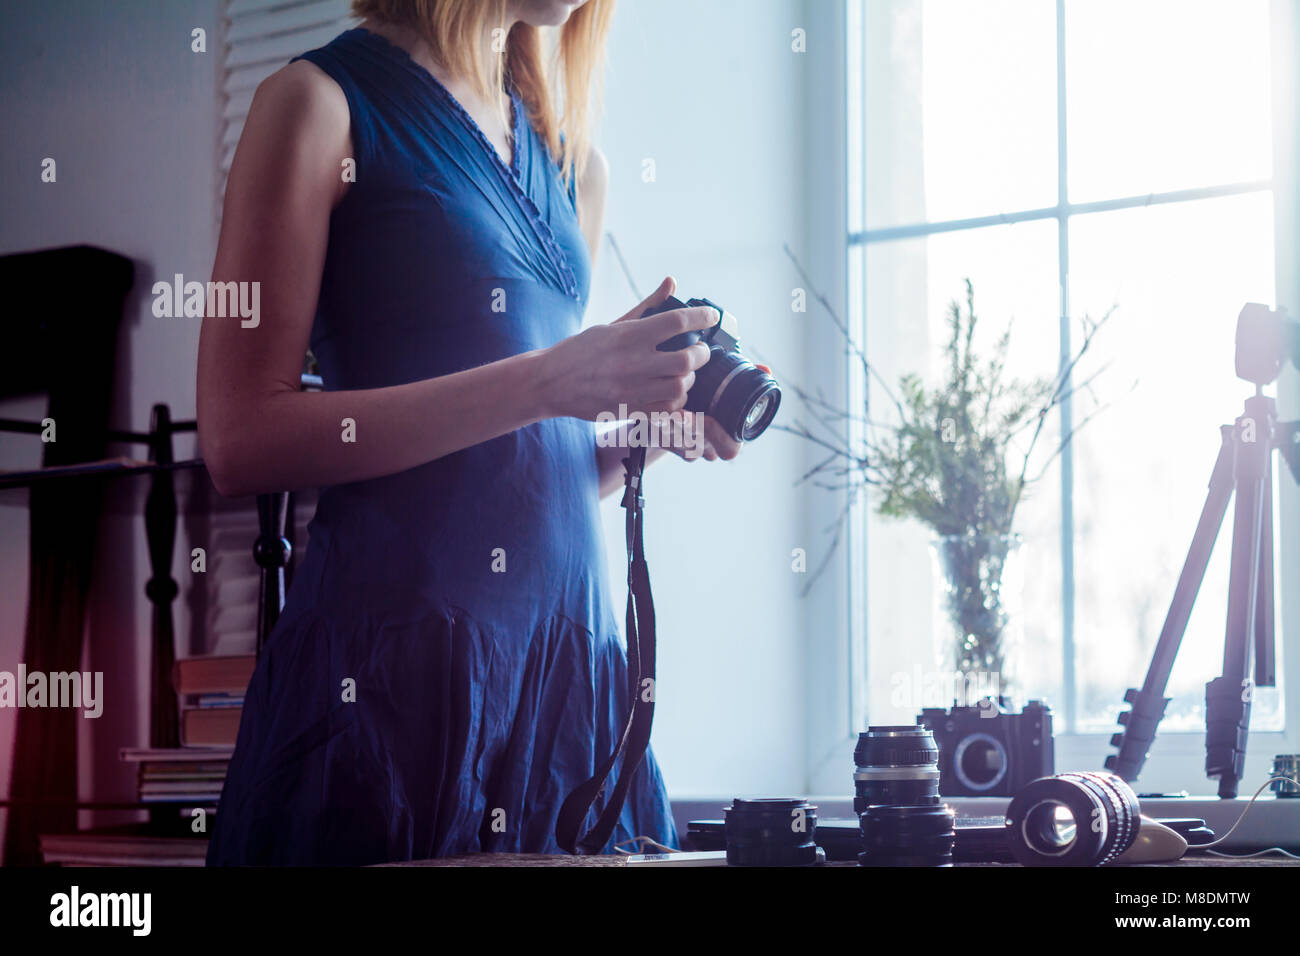 Mid adult woman, beside window, holding camera, camera lenses on table in front of her, mid section Stock Photo